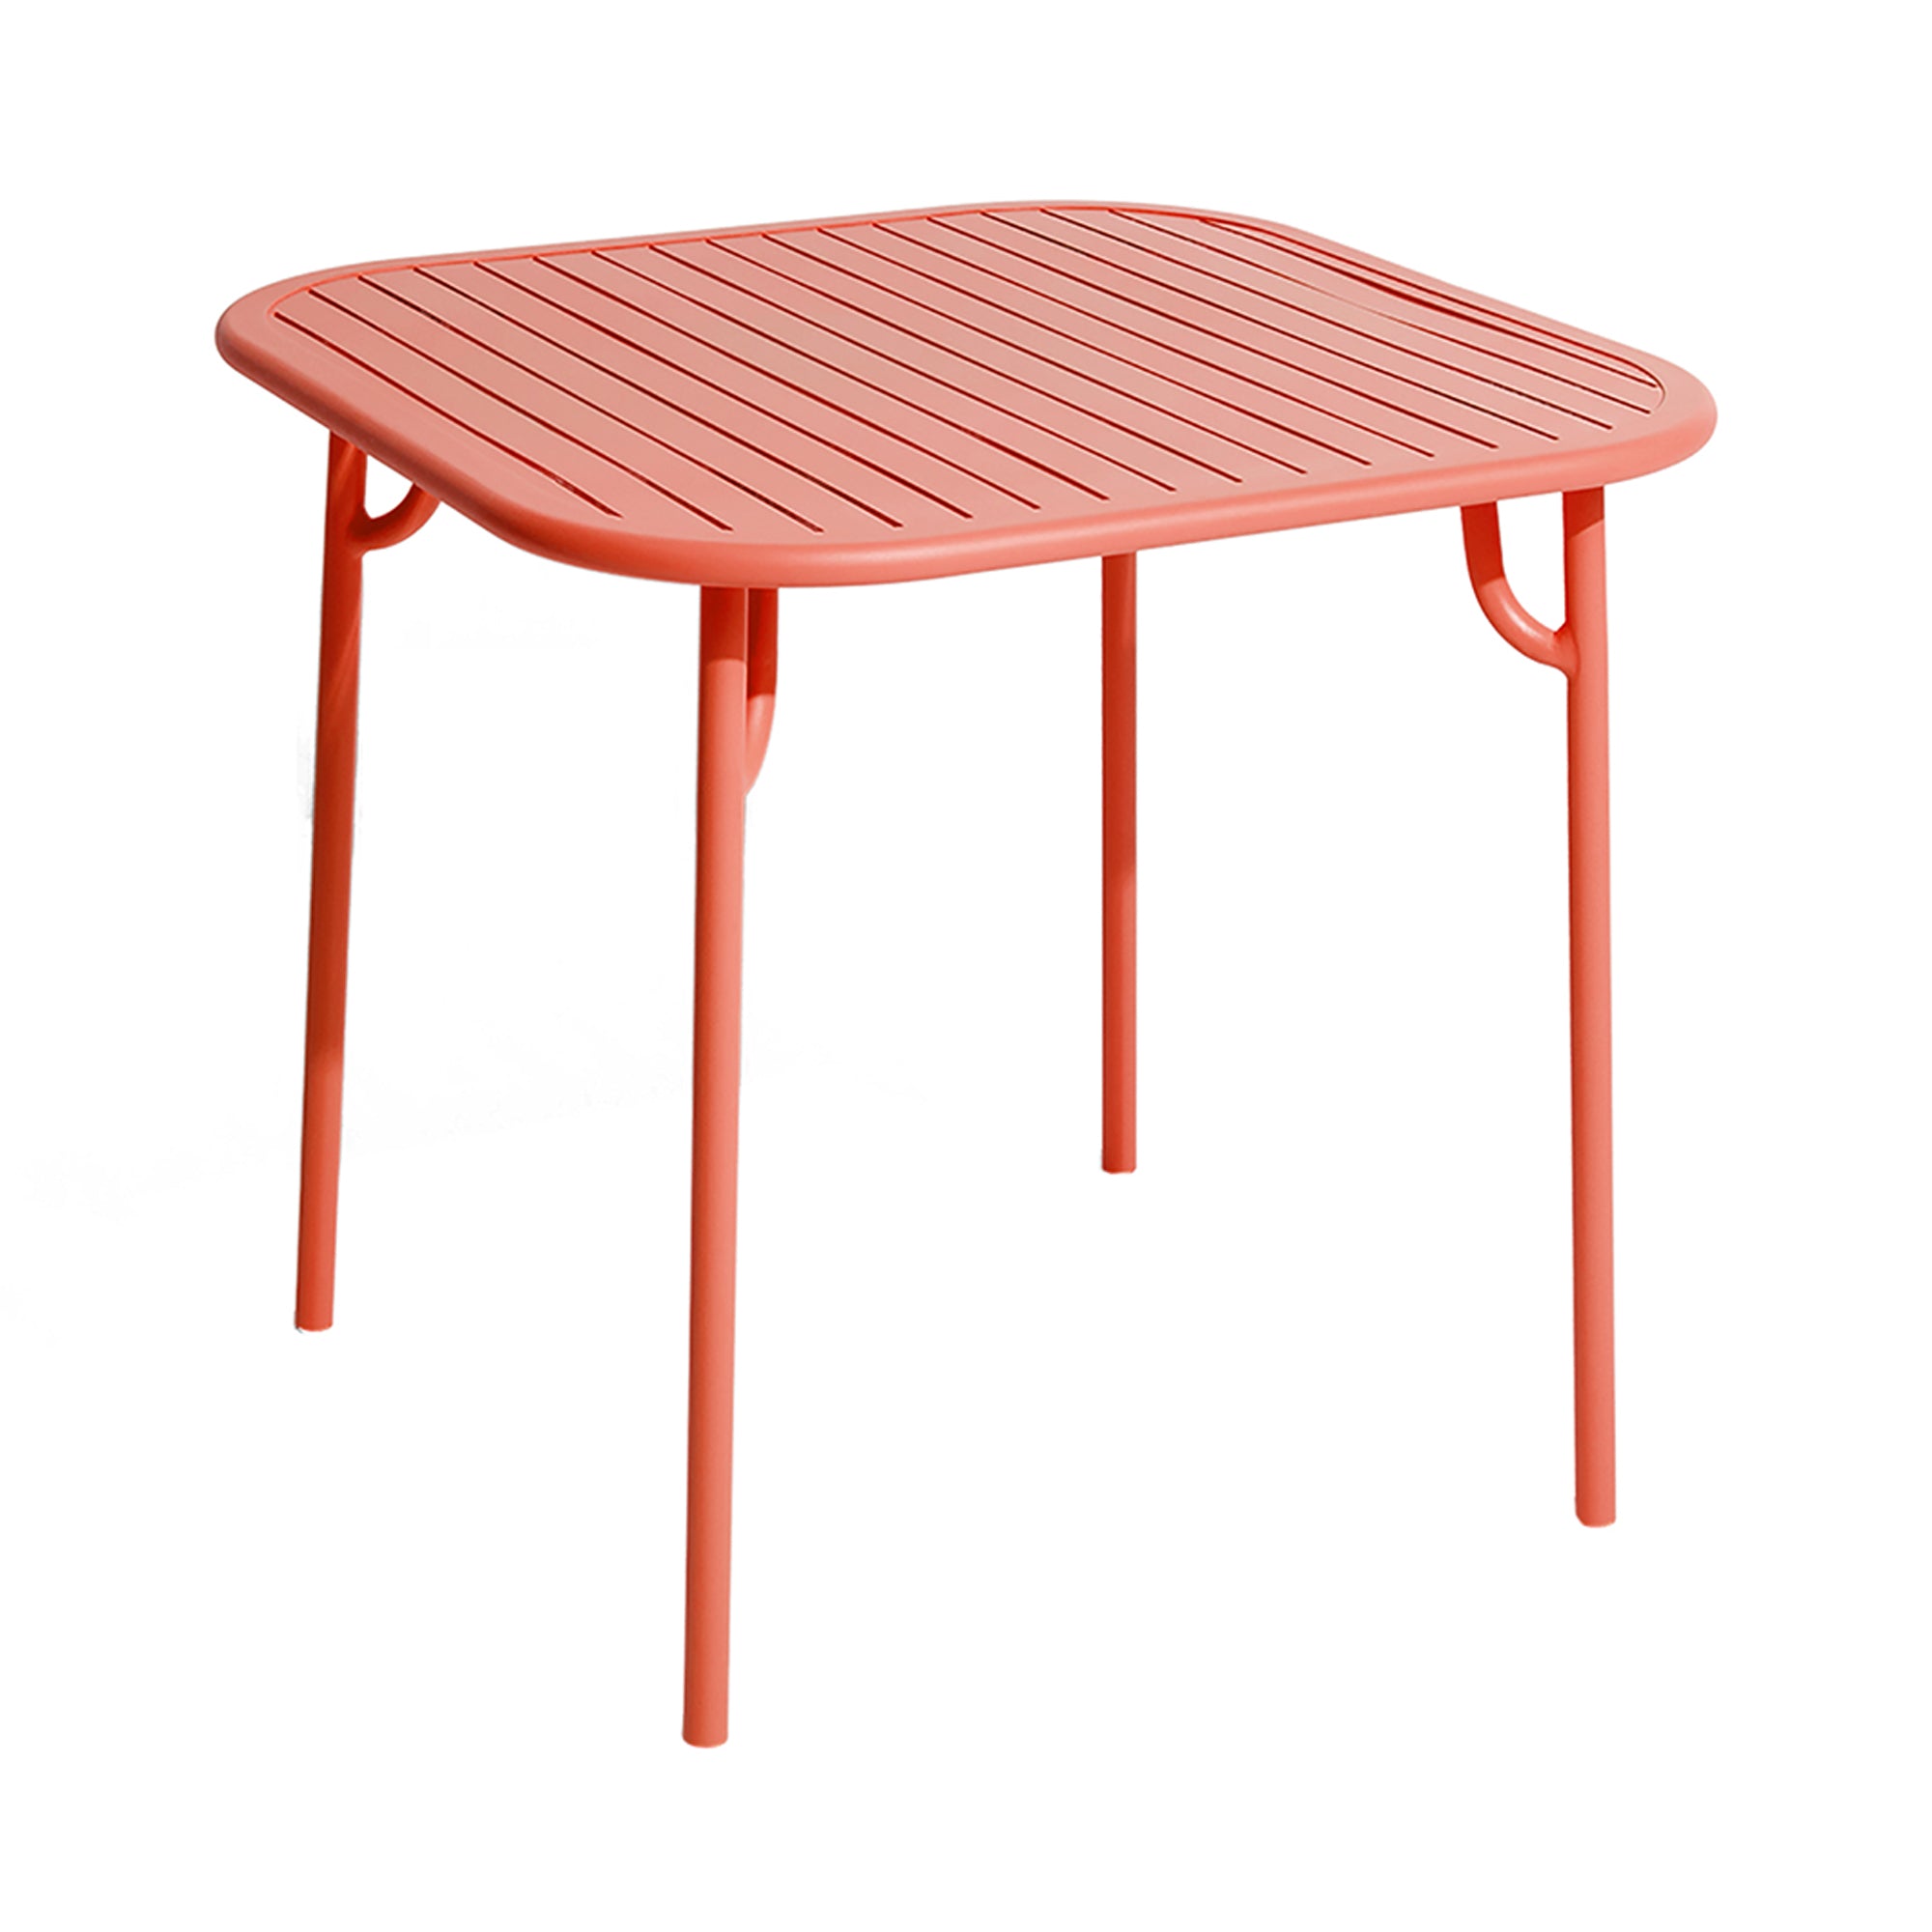 Week-End Square Dining Table with Slats: Coral